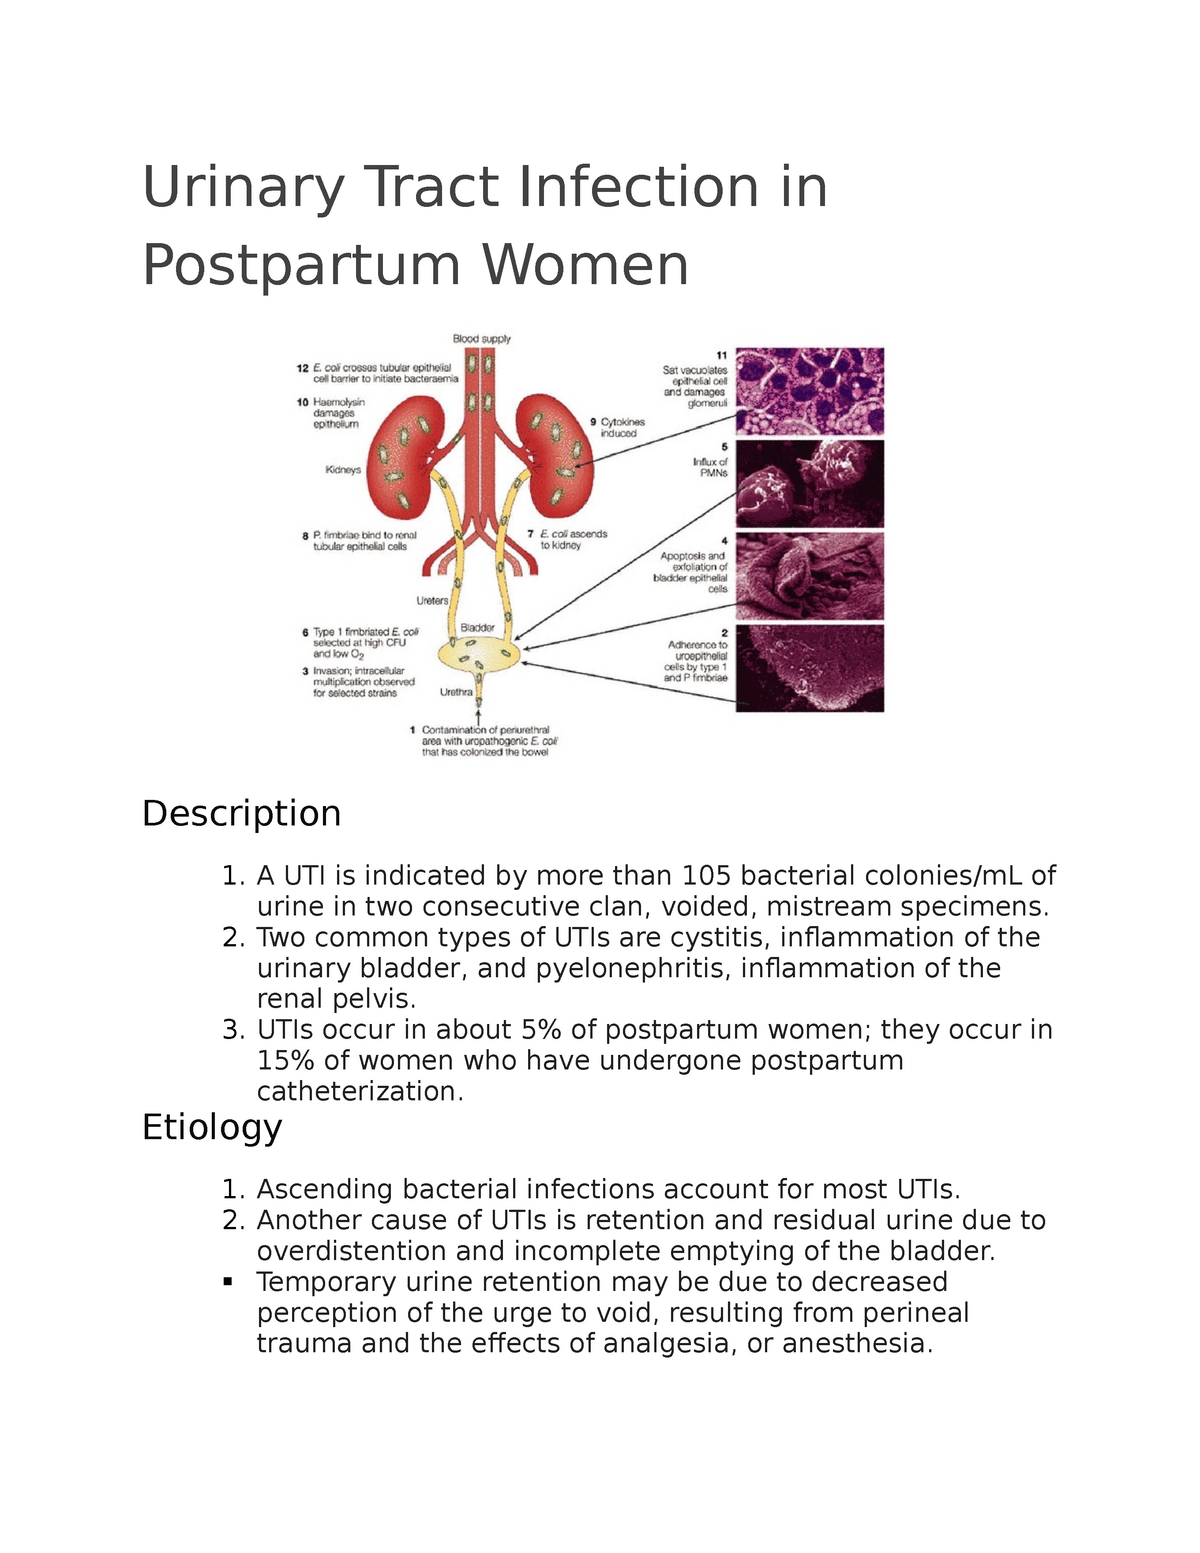 Urinary Tract Infection in Postpartum Women - Urinary Tract Infection in  Postpartum Women - Studocu